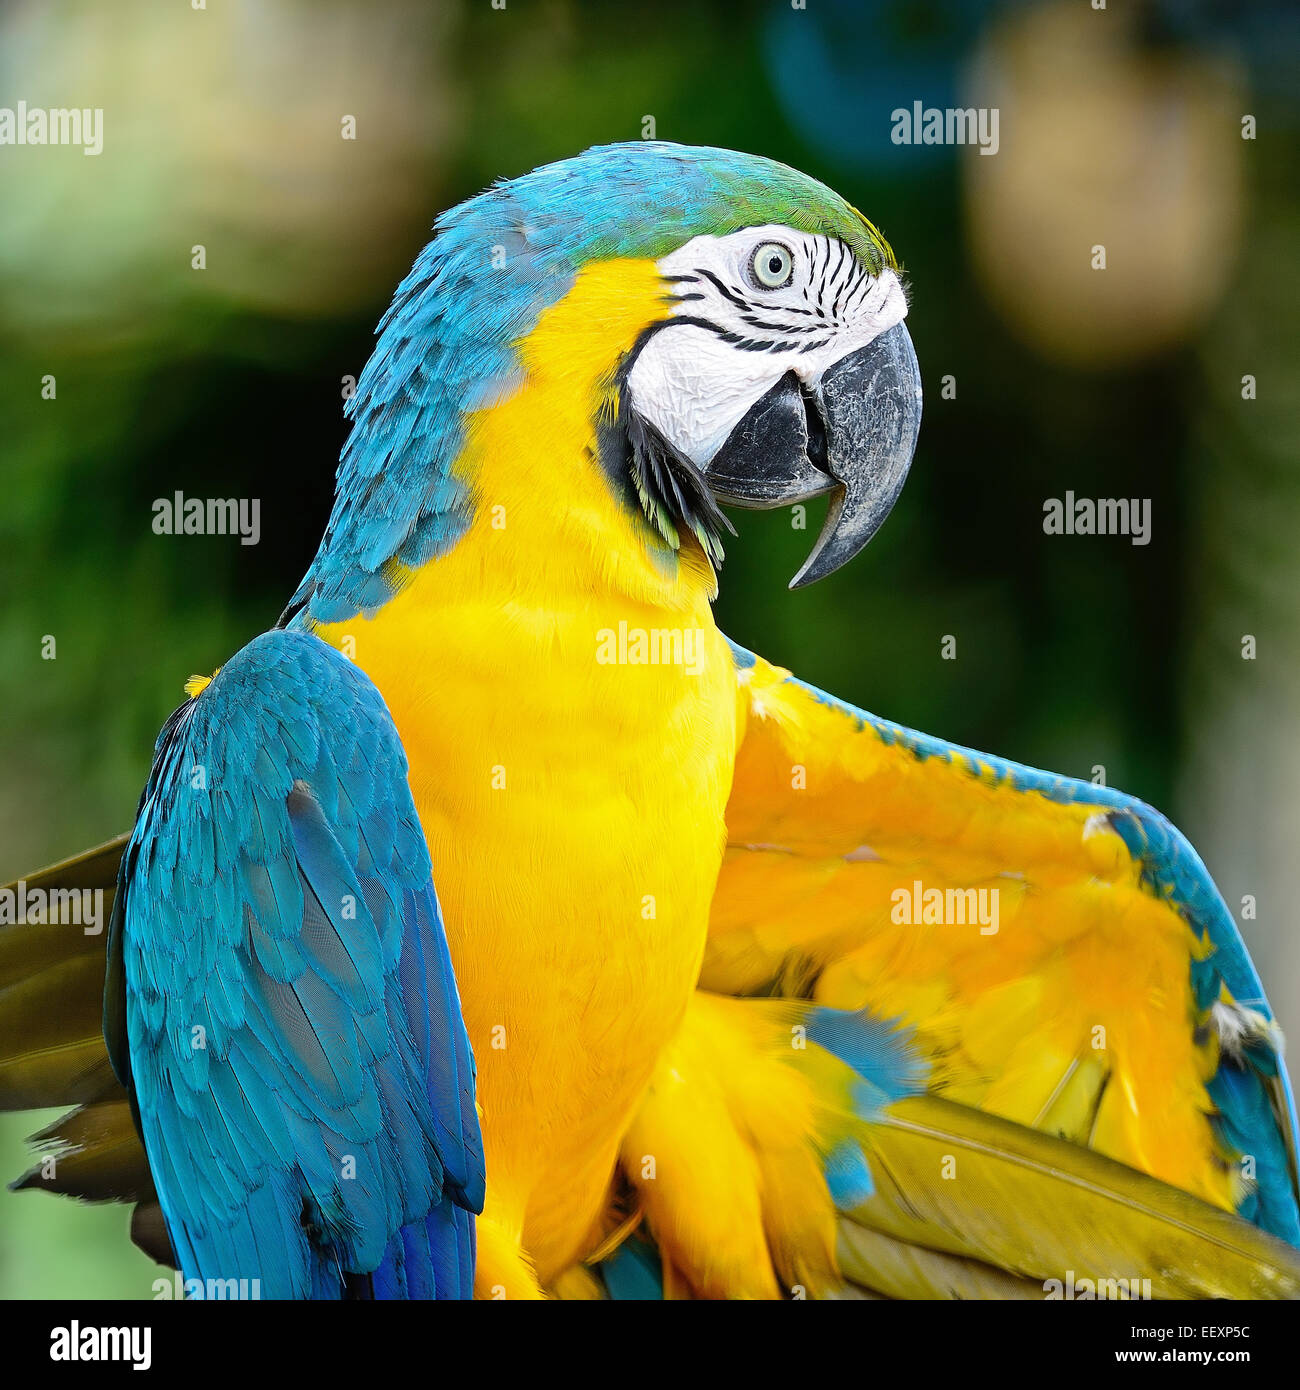 Colorful of Blue and Gold Macaw aviary, portrait profile Stock Photo